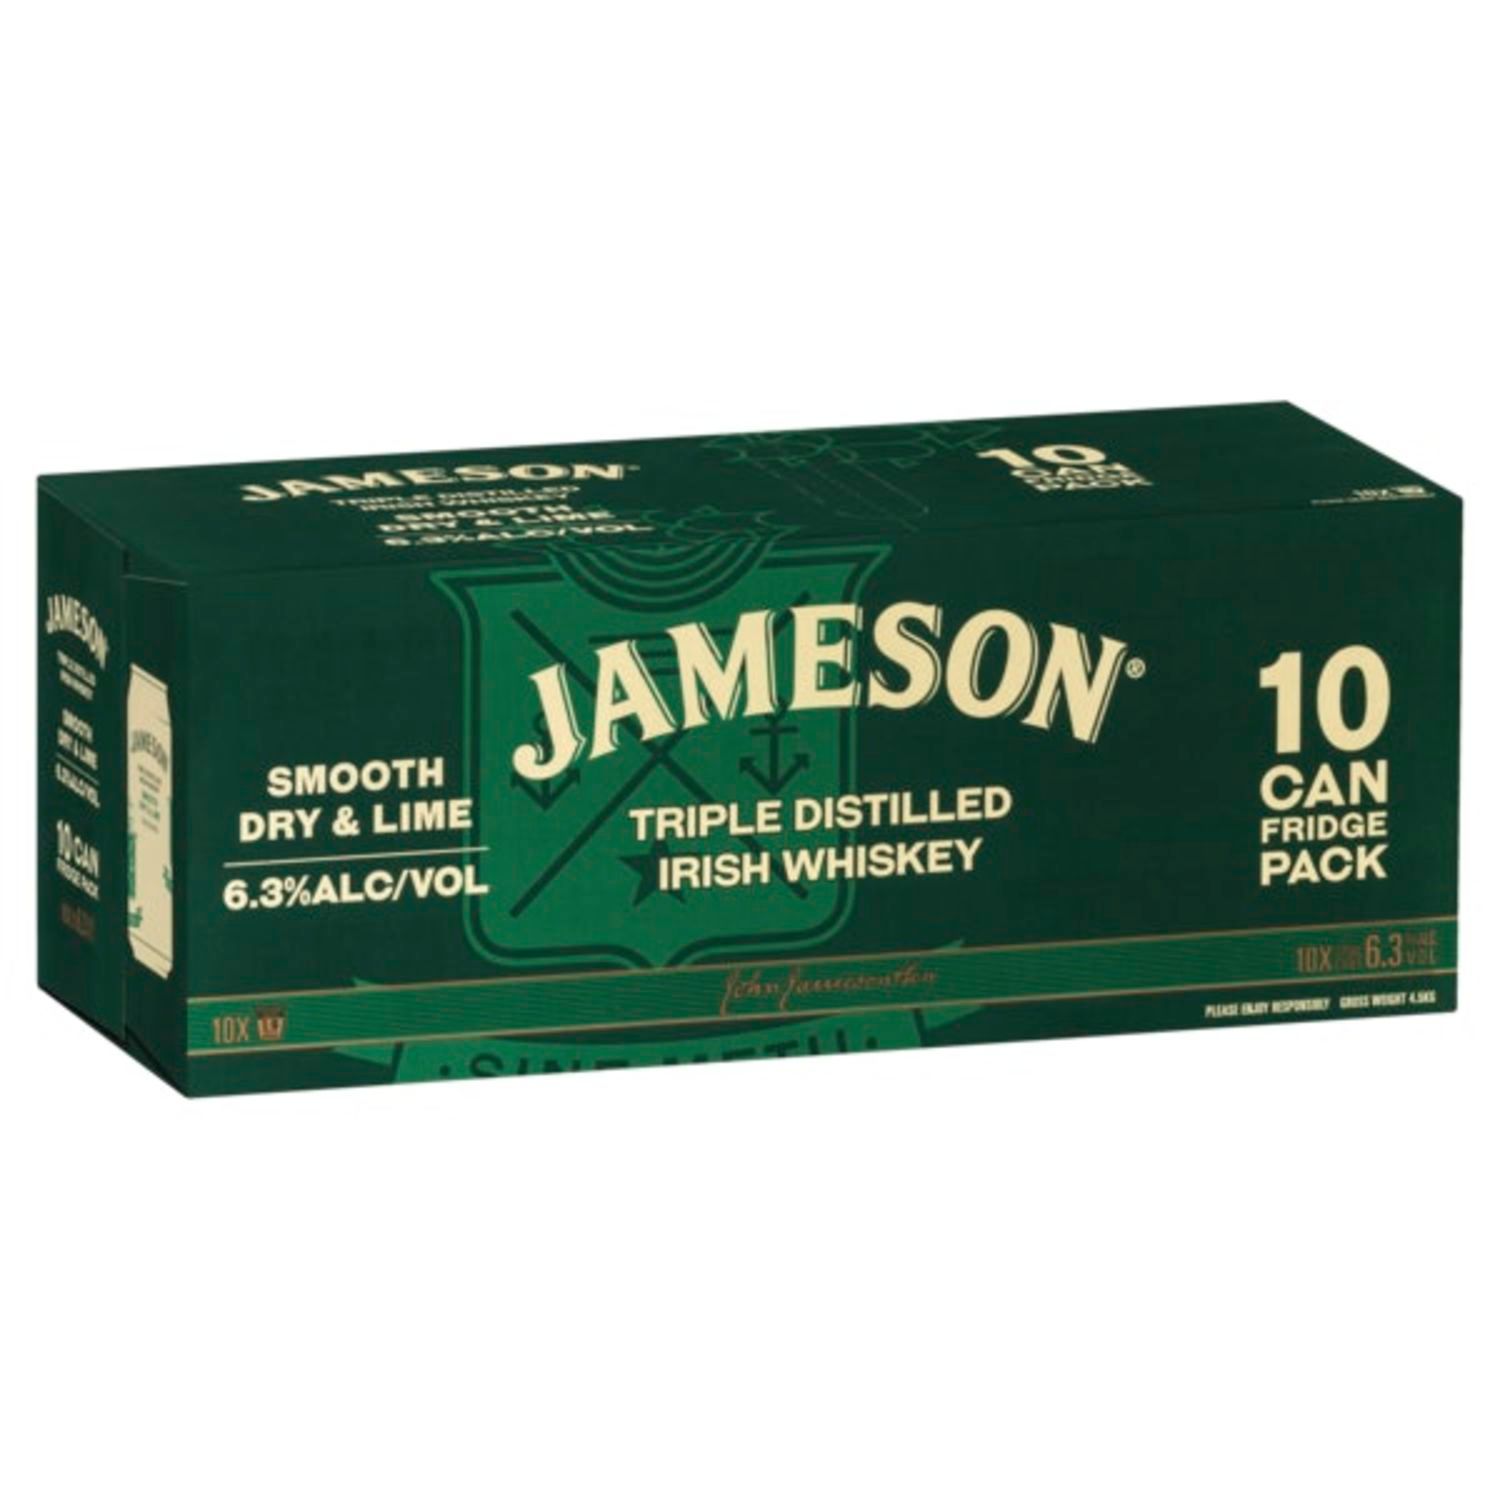 Jameson Irish Whiskey Dry & Lime 6.3% Can 375mL 10 Pack